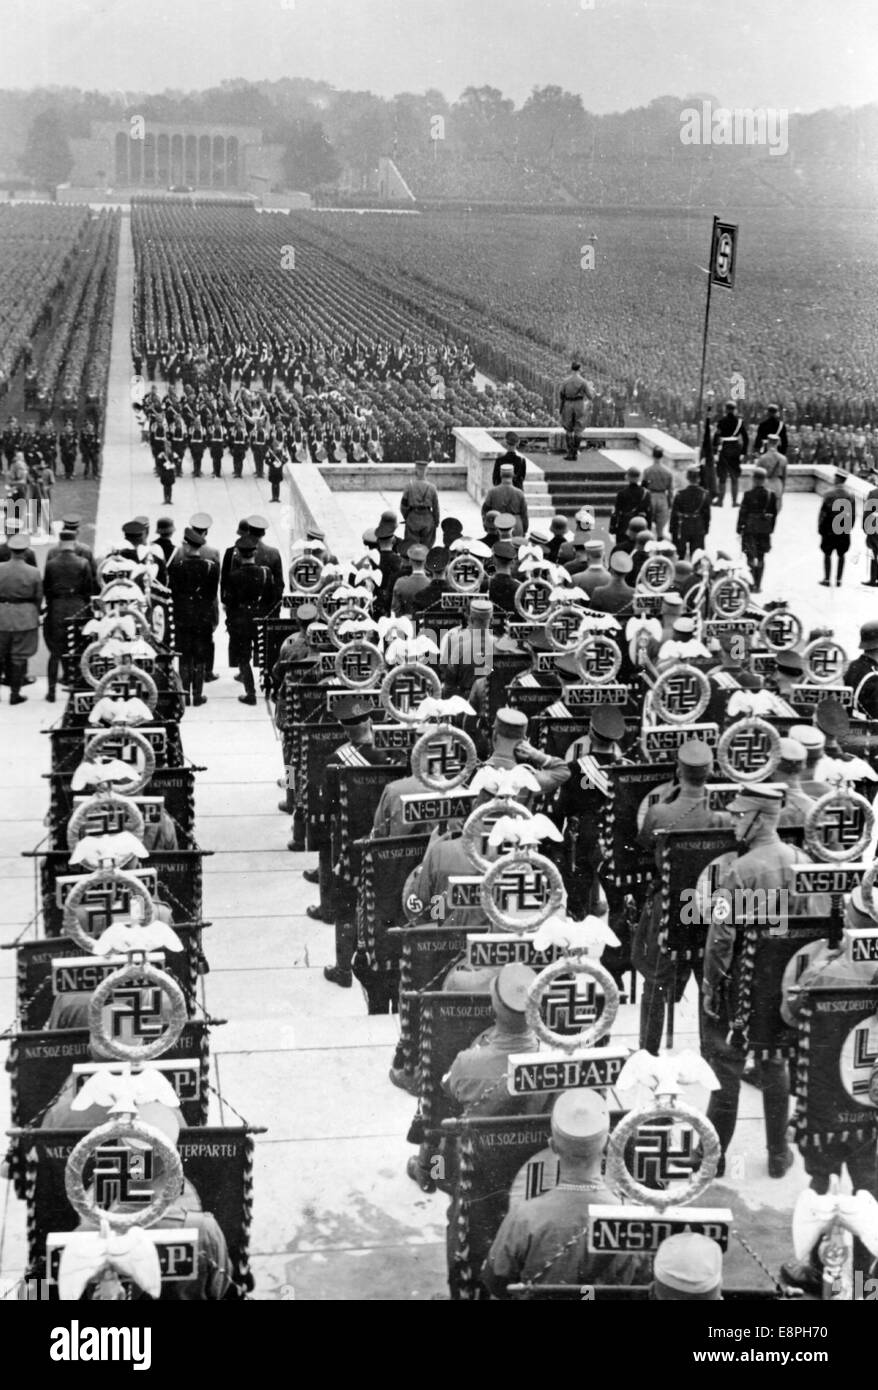 Nuremberg Rally 1937 in Nuremberg, Germany - Nazi party rally grounds - View of Luitpoldarena during a speech by Adolf Hitler to units of the Sturmtruppe (SA), Schutzstaffel (SS), National Socialist Motor Corps (NSKK) and National Socialist Flyers Corps (NSFK). In the background: the Hall of Honour. (Flaws in quality due to the historic picture copy) Fotoarchiv für Zeitgeschichtee - NO WIRE SERVICE - Stock Photo